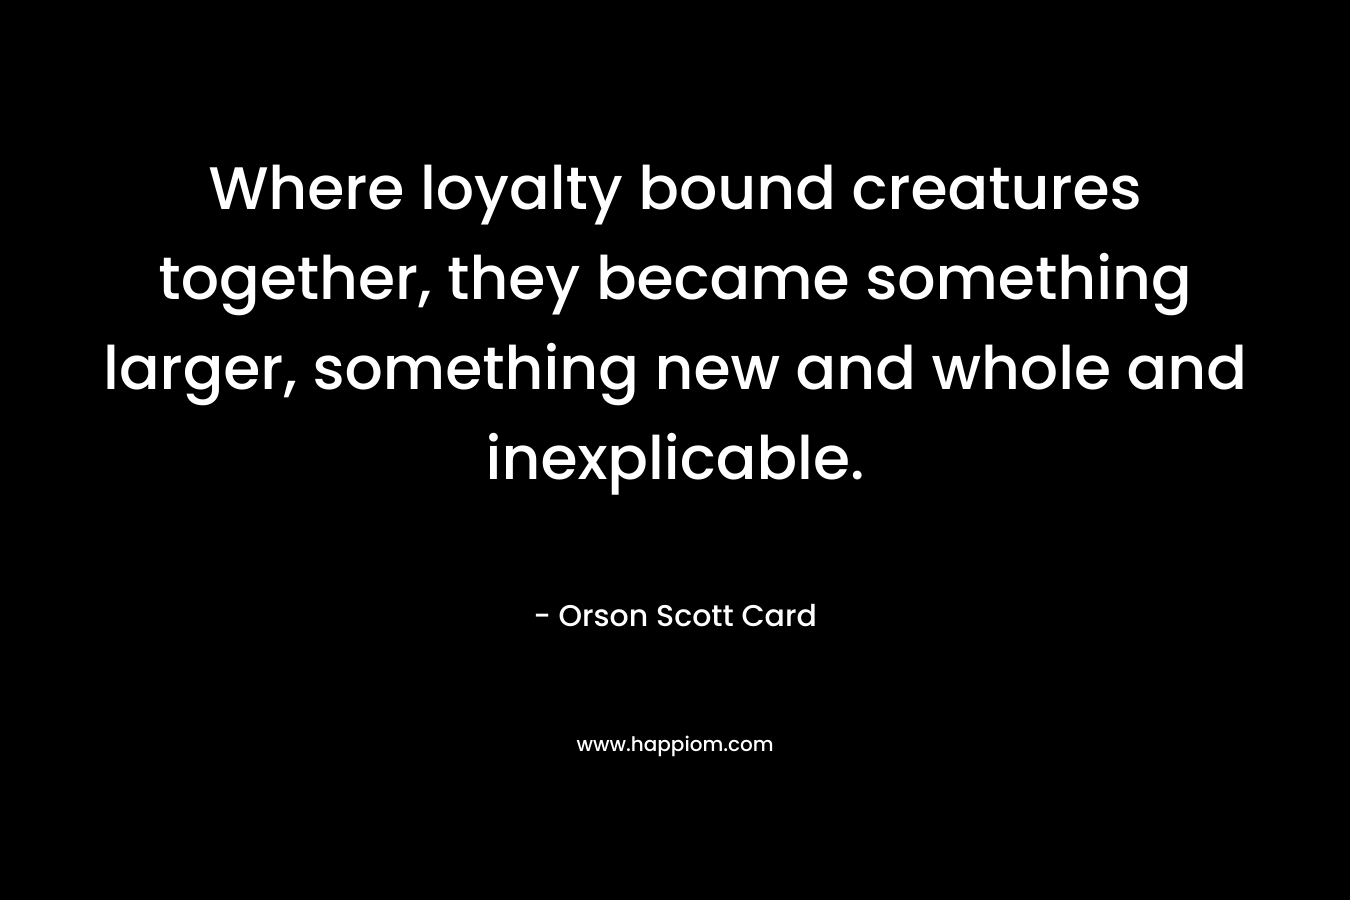 Where loyalty bound creatures together, they became something larger, something new and whole and inexplicable.